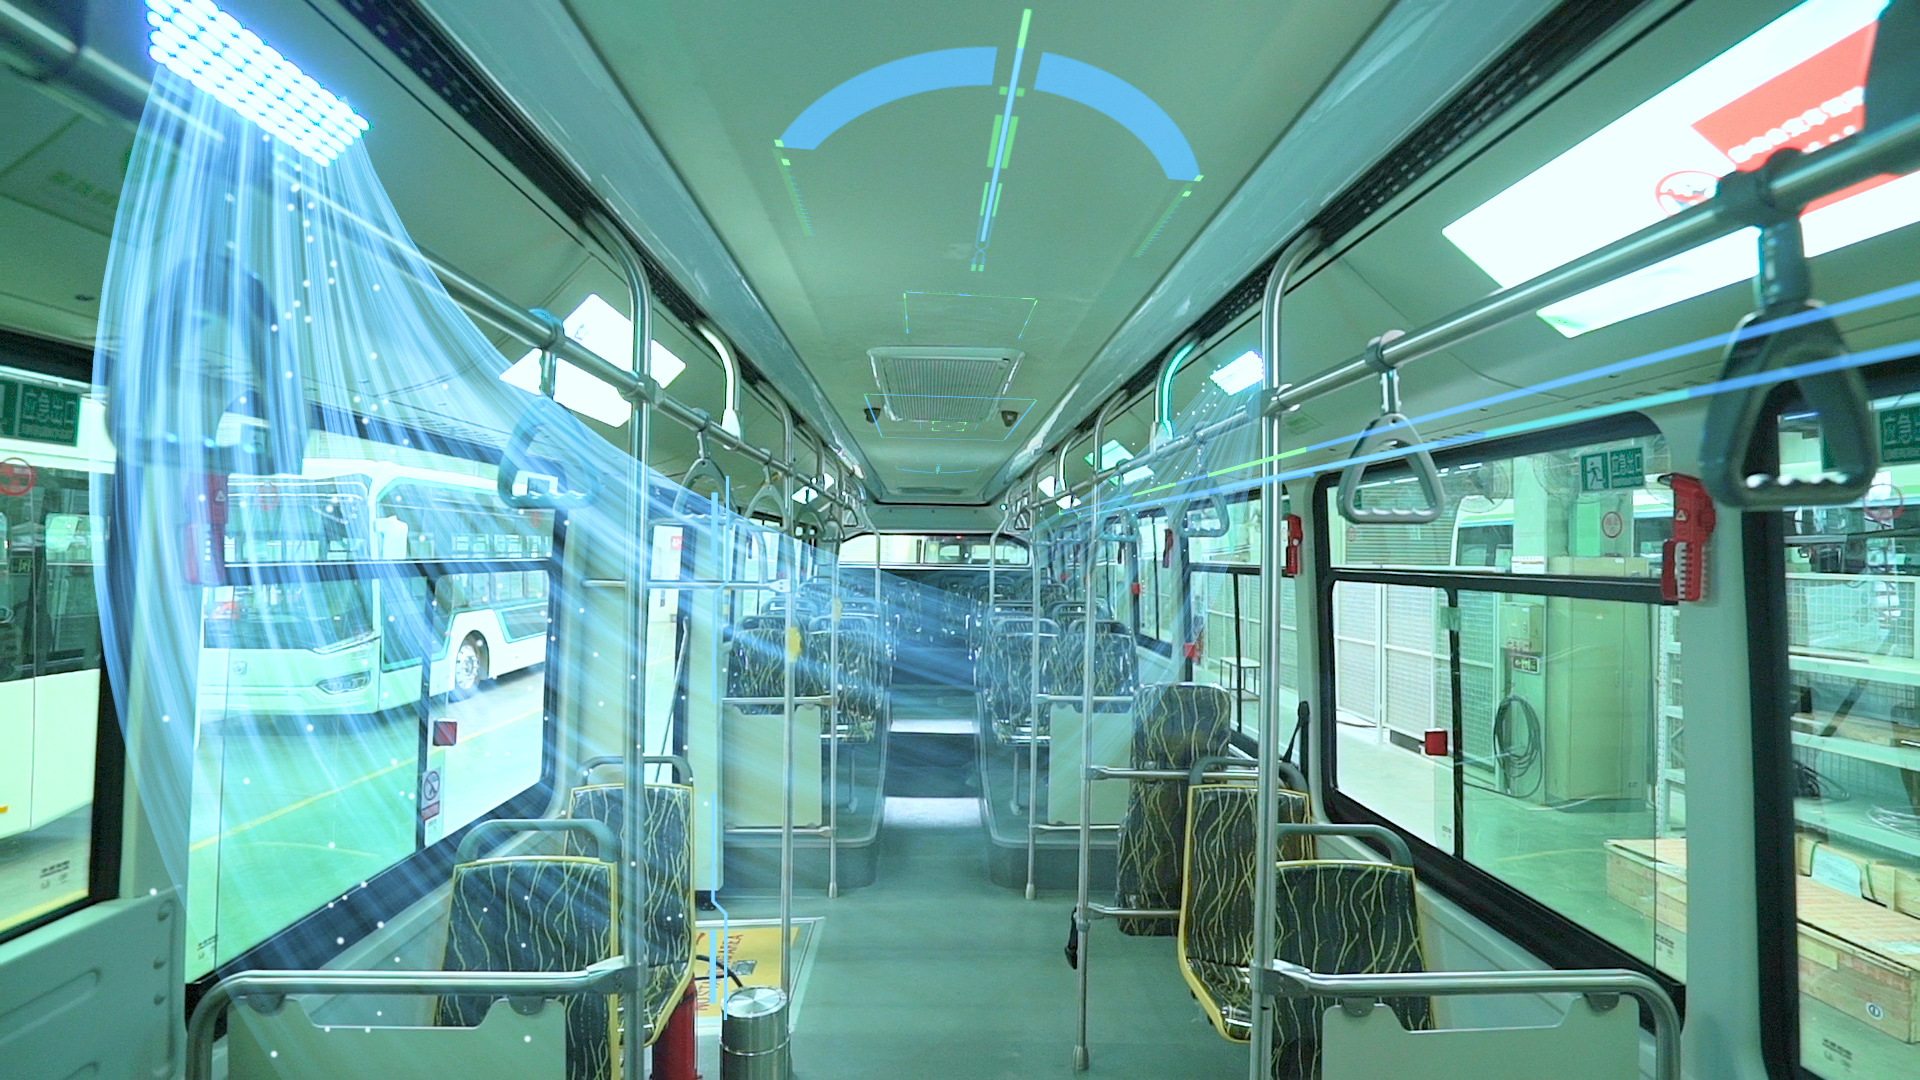 Ultraviolet light can be delivered out to the whole area of drivers and passengers, effectively achieving a complete sterilization and purification of the environment inside SUNWIN bus.